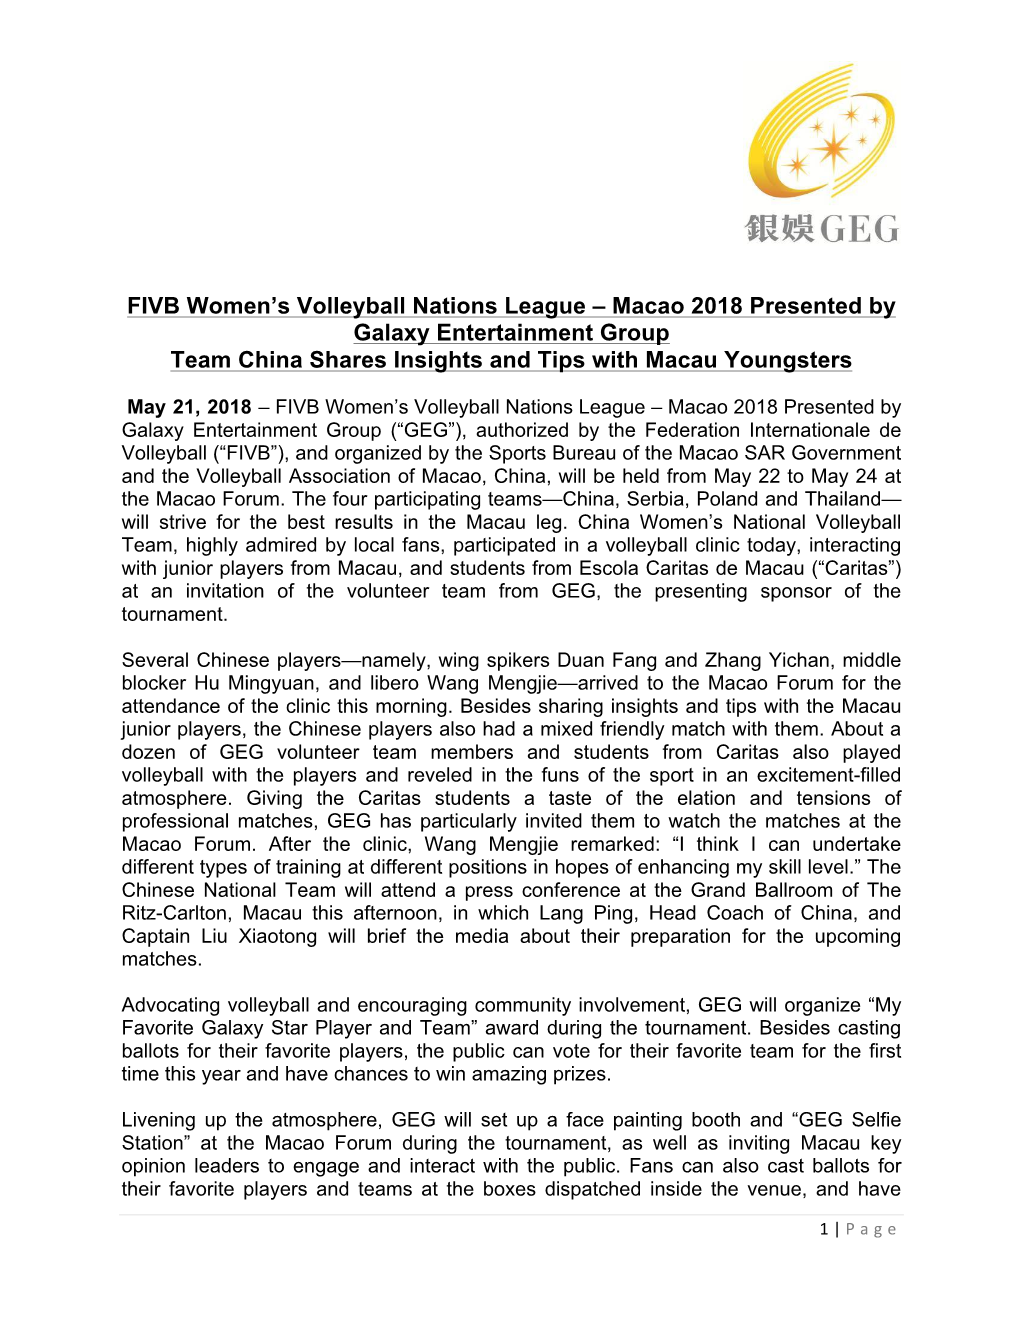 FIVB Women's Volleyball Nations League – Macao 2018 Presented by Galaxy Entertainment Group Team China Shares Insights and T